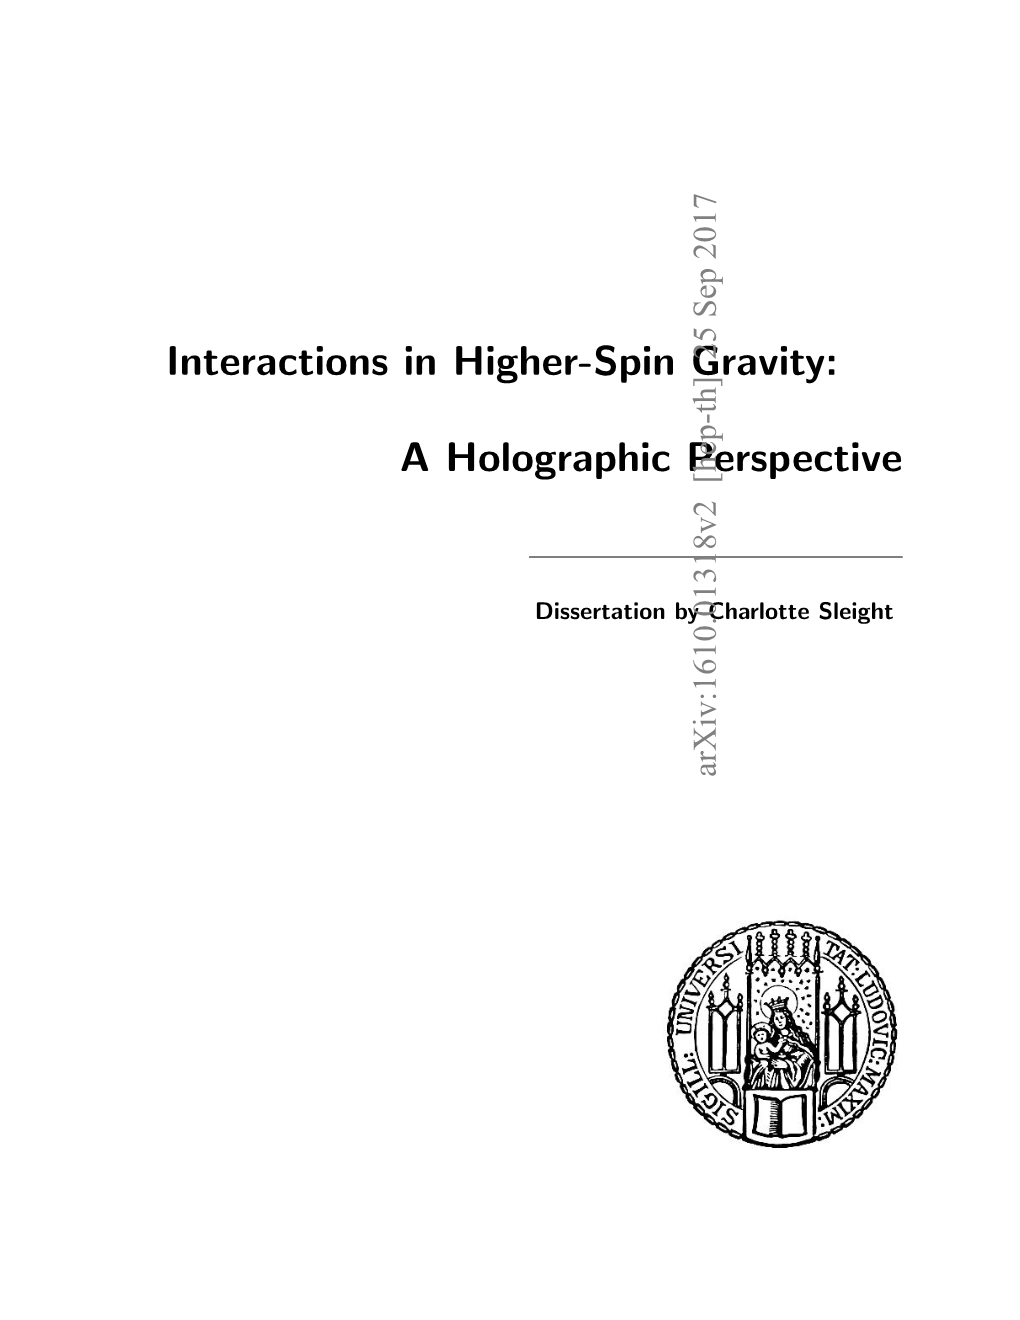 Interactions in Higher-Spin Gravity